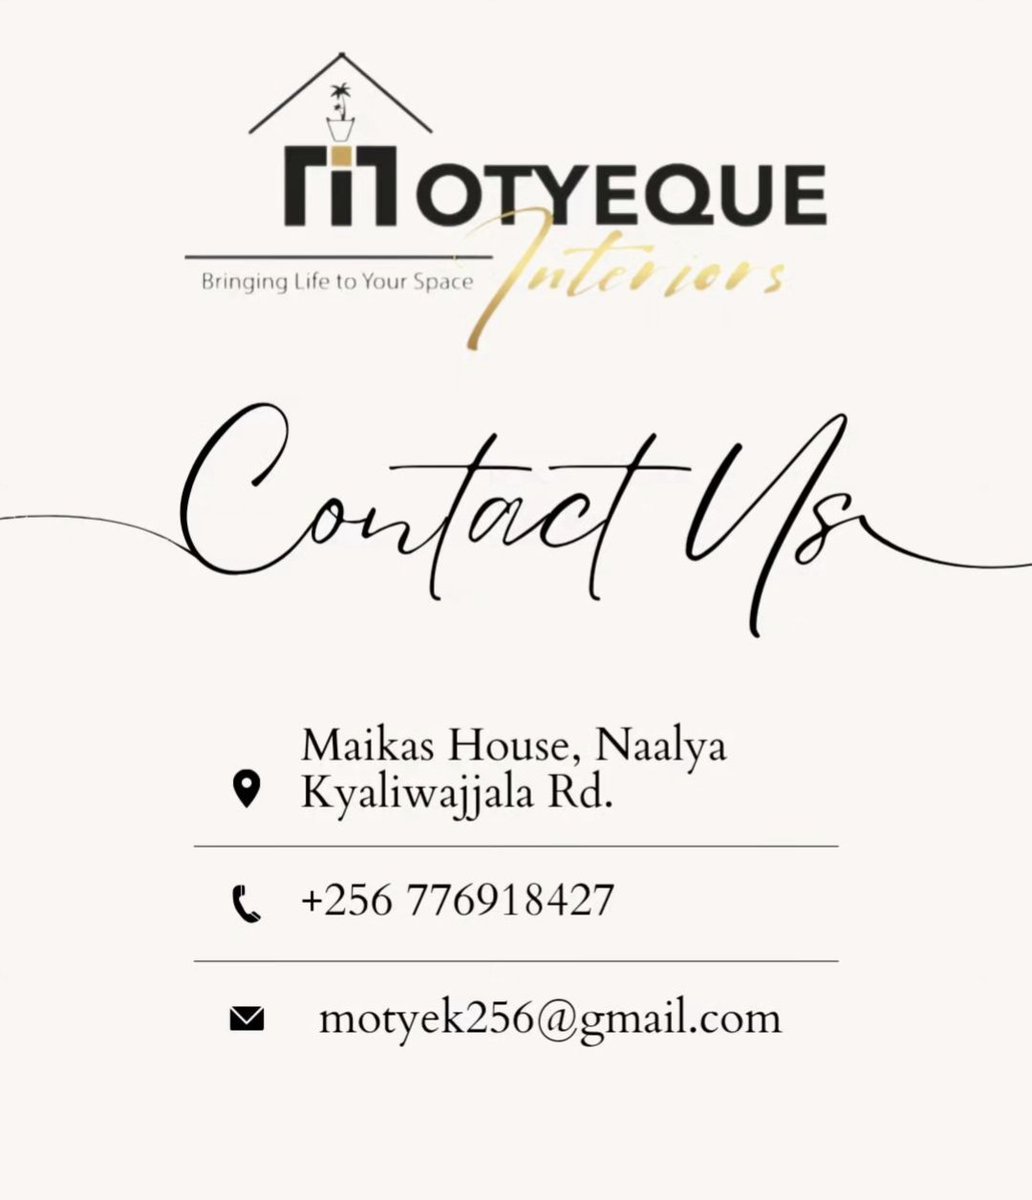 Looking to give your space a new look? Contact us today. We are located at Maikas House Naalya Kyaliwajjala Rd after Mogas fuel station, you can also Call/WhatsApp us on 0776918427.

#motyequeinteriors #interioedesigns #interiordecor #homedeco #officedecor